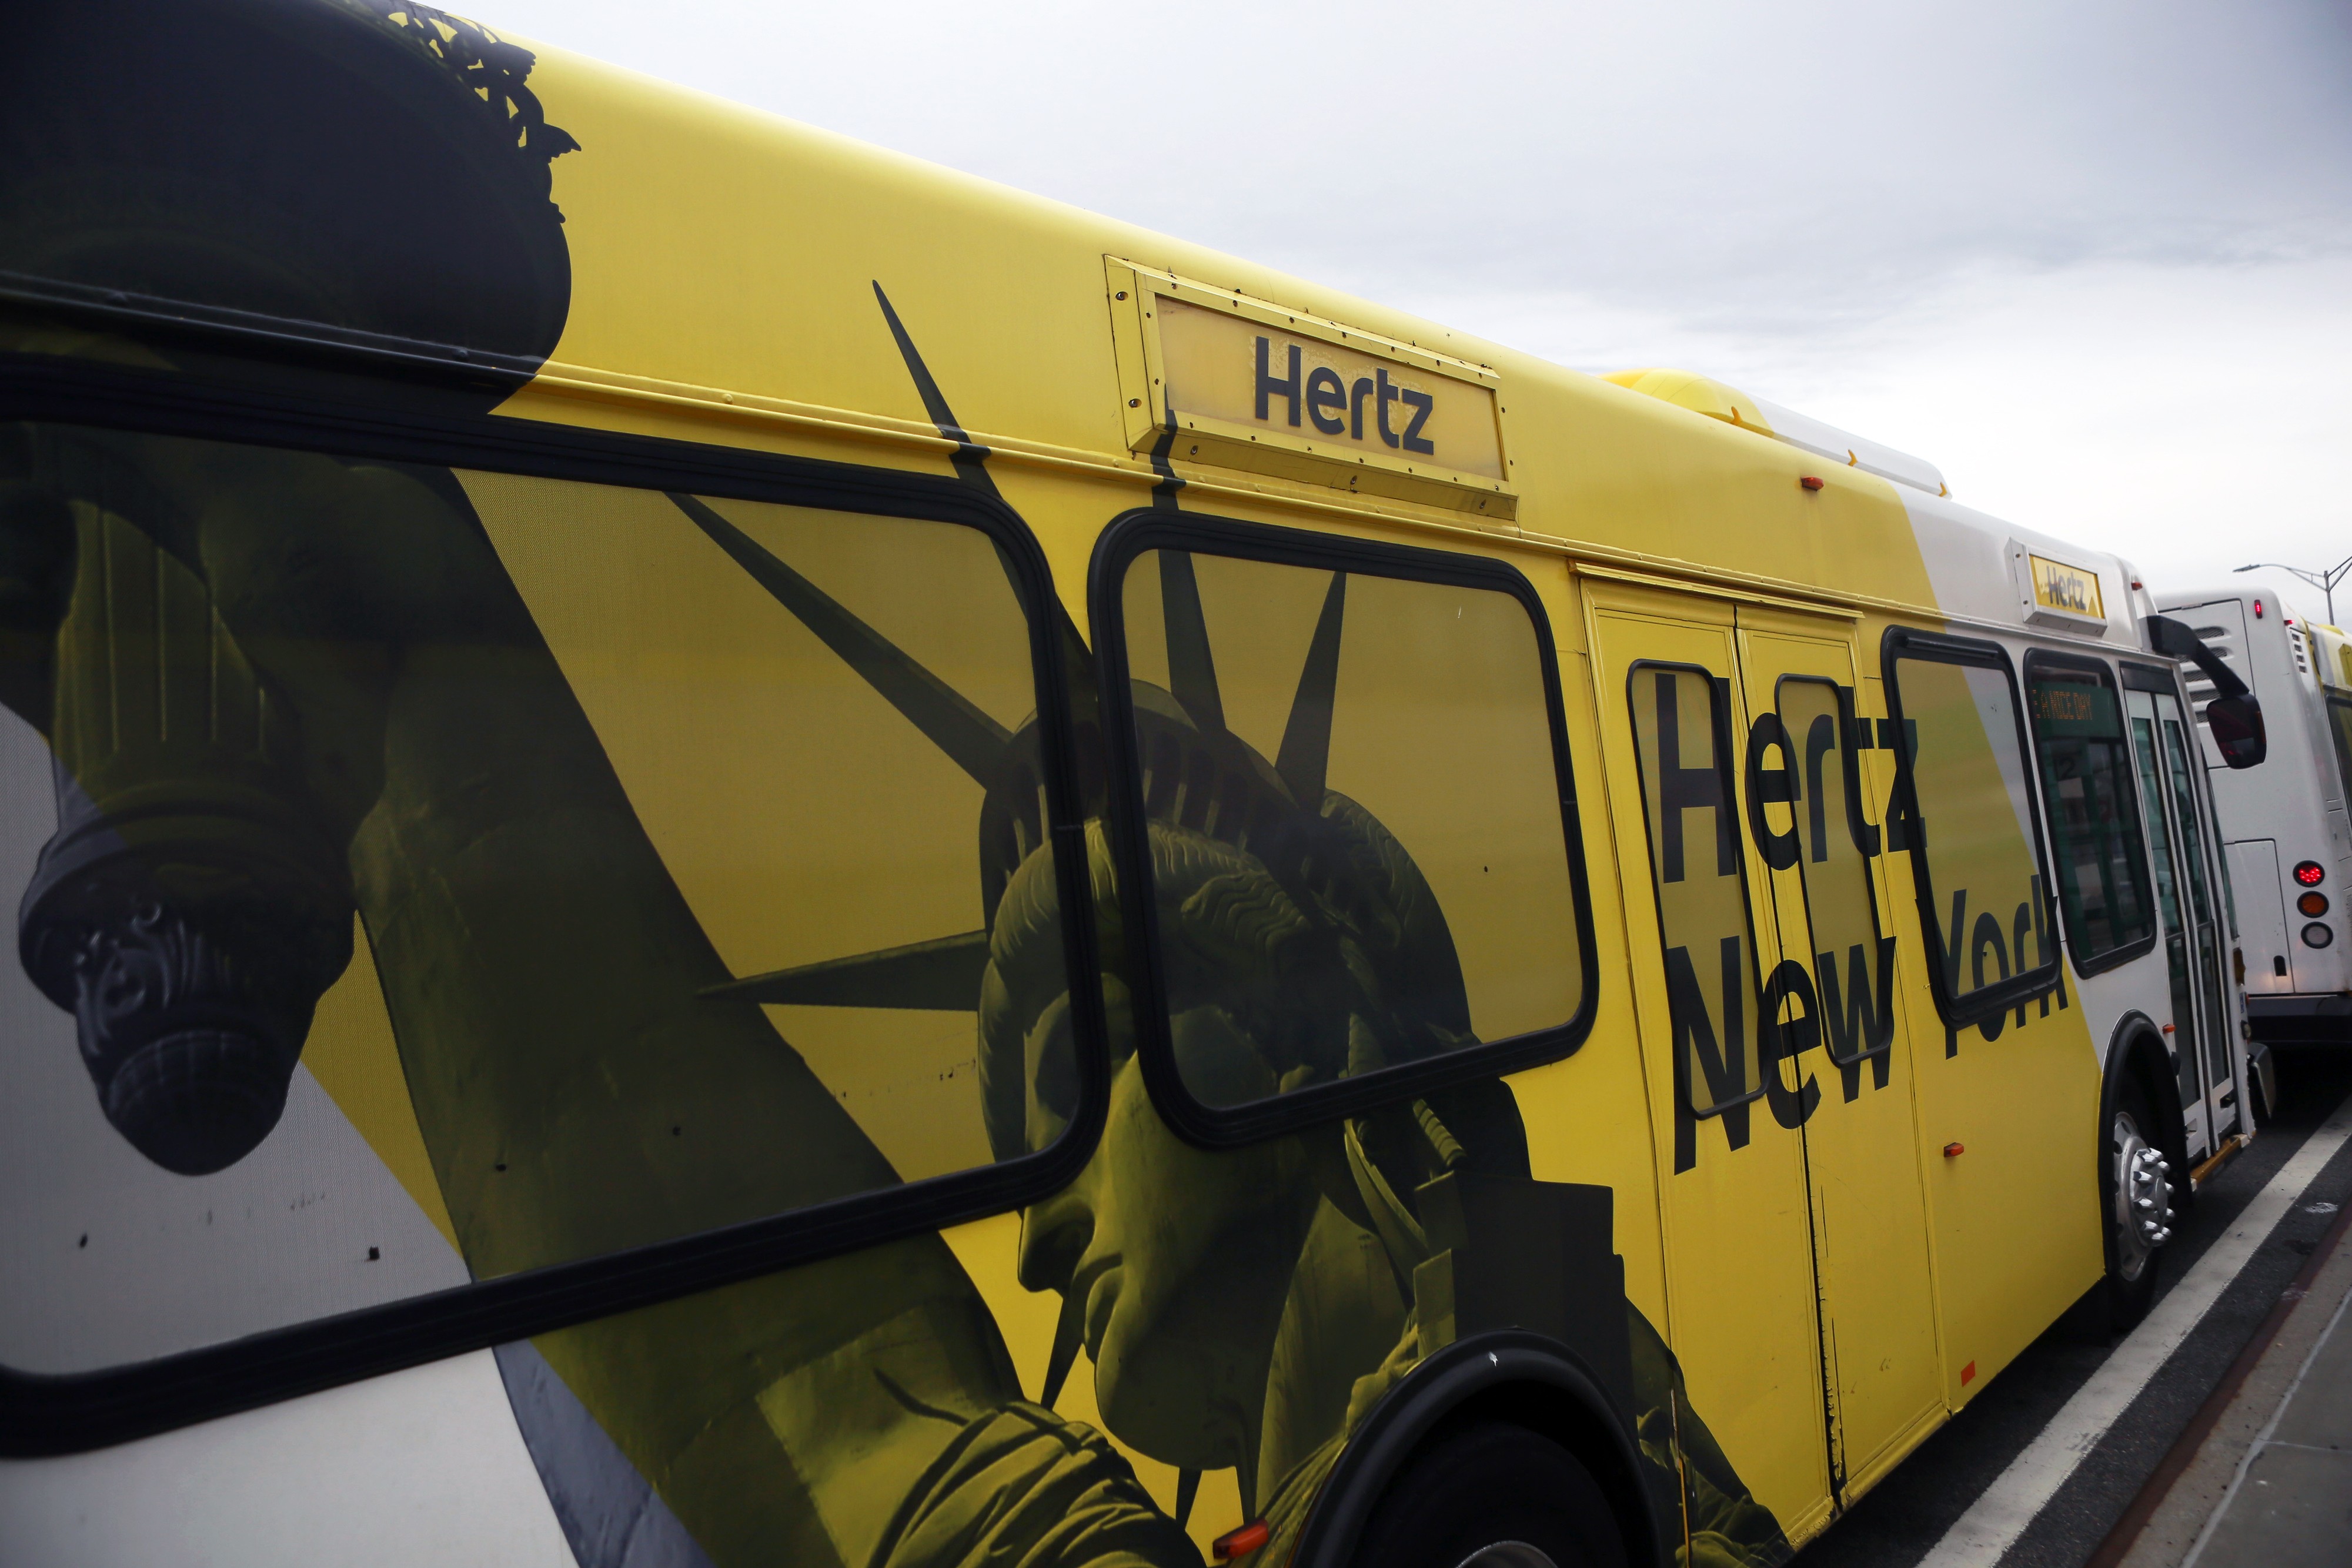 An image of the Statue of Liberty is displayed on a shuttle bus at LaGuardia Airport in New York. The US economy draws its strength from its transparent, fair and democratic system. Photo: Bloomberg 